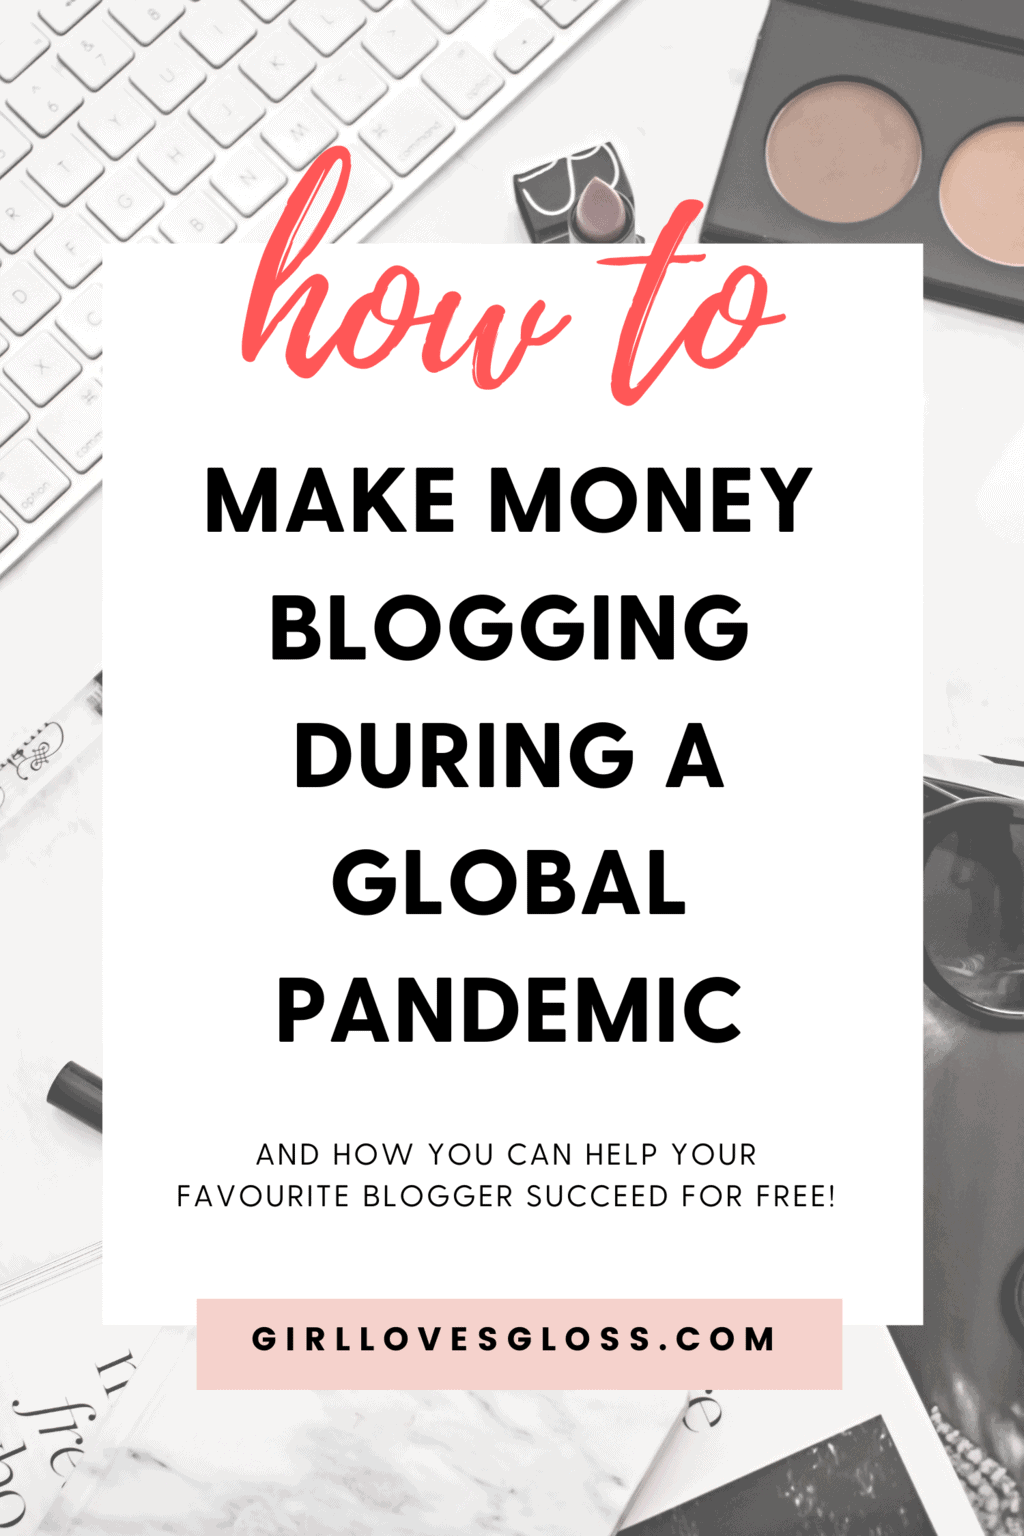 How to make money blogging during the covid 19 pandemic